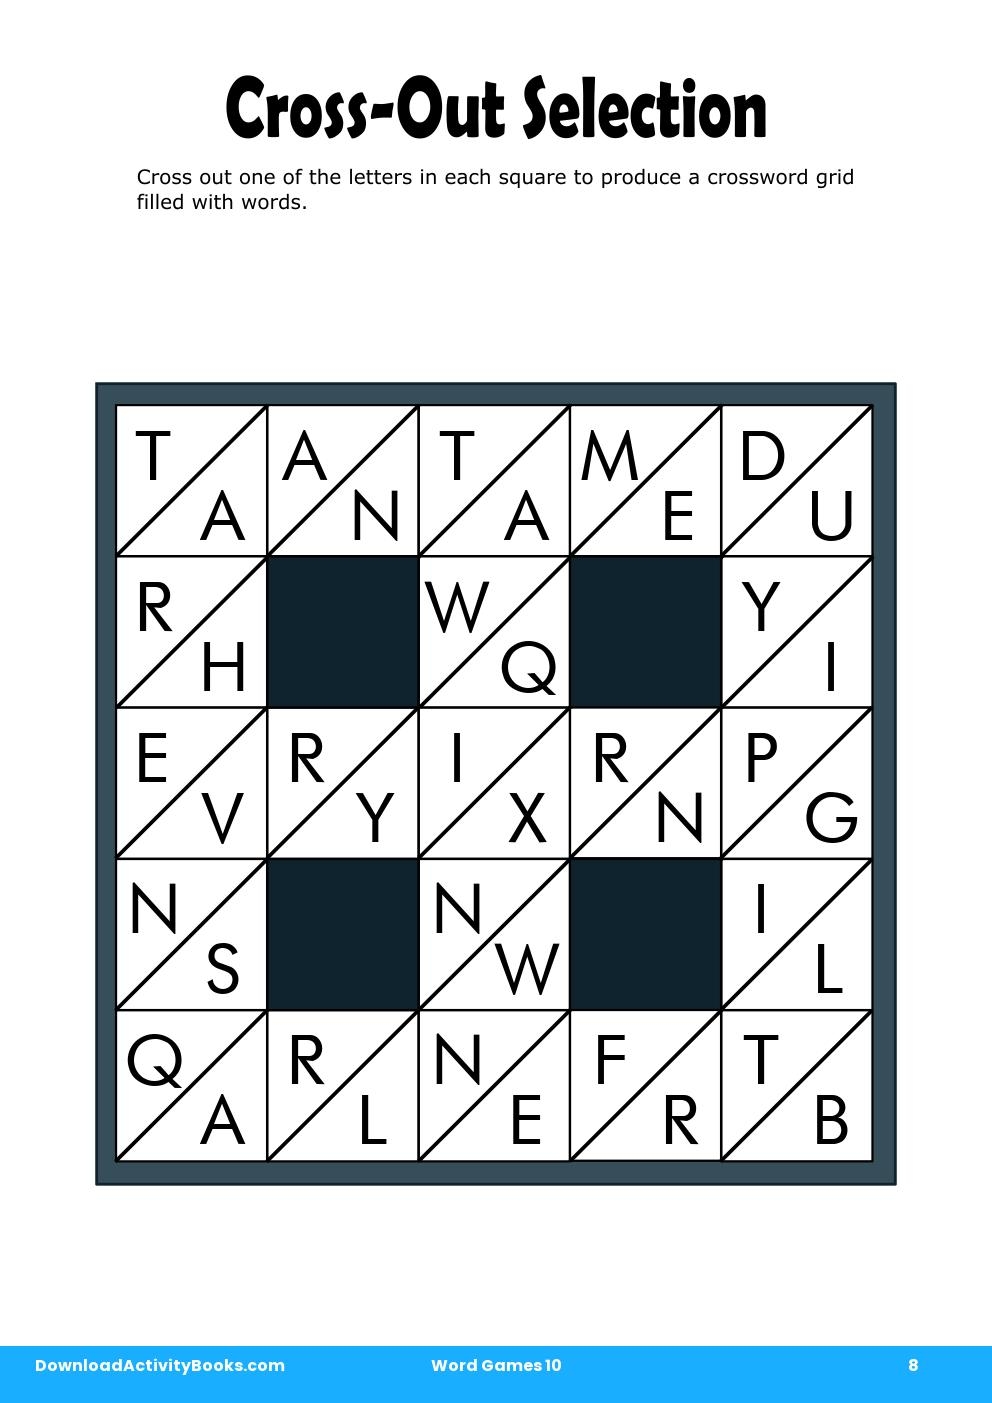 Cross-Out Selection in Word Games 10